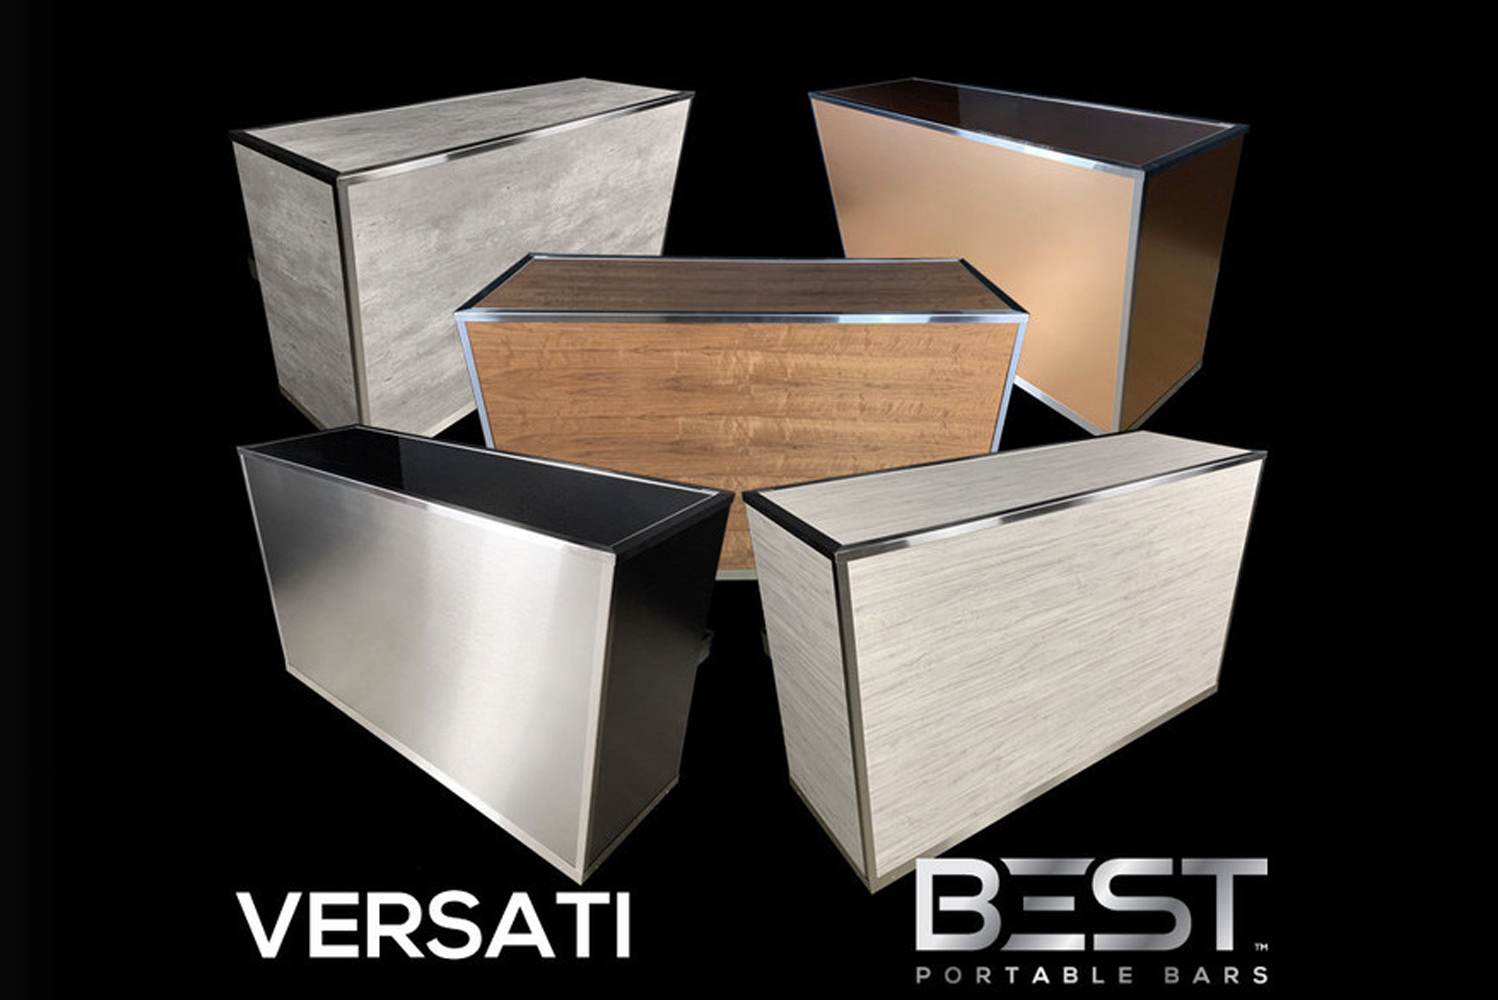 Montreal-based Best Portable Bars released its newest model the Versati portable bar designed for events hotels rental com